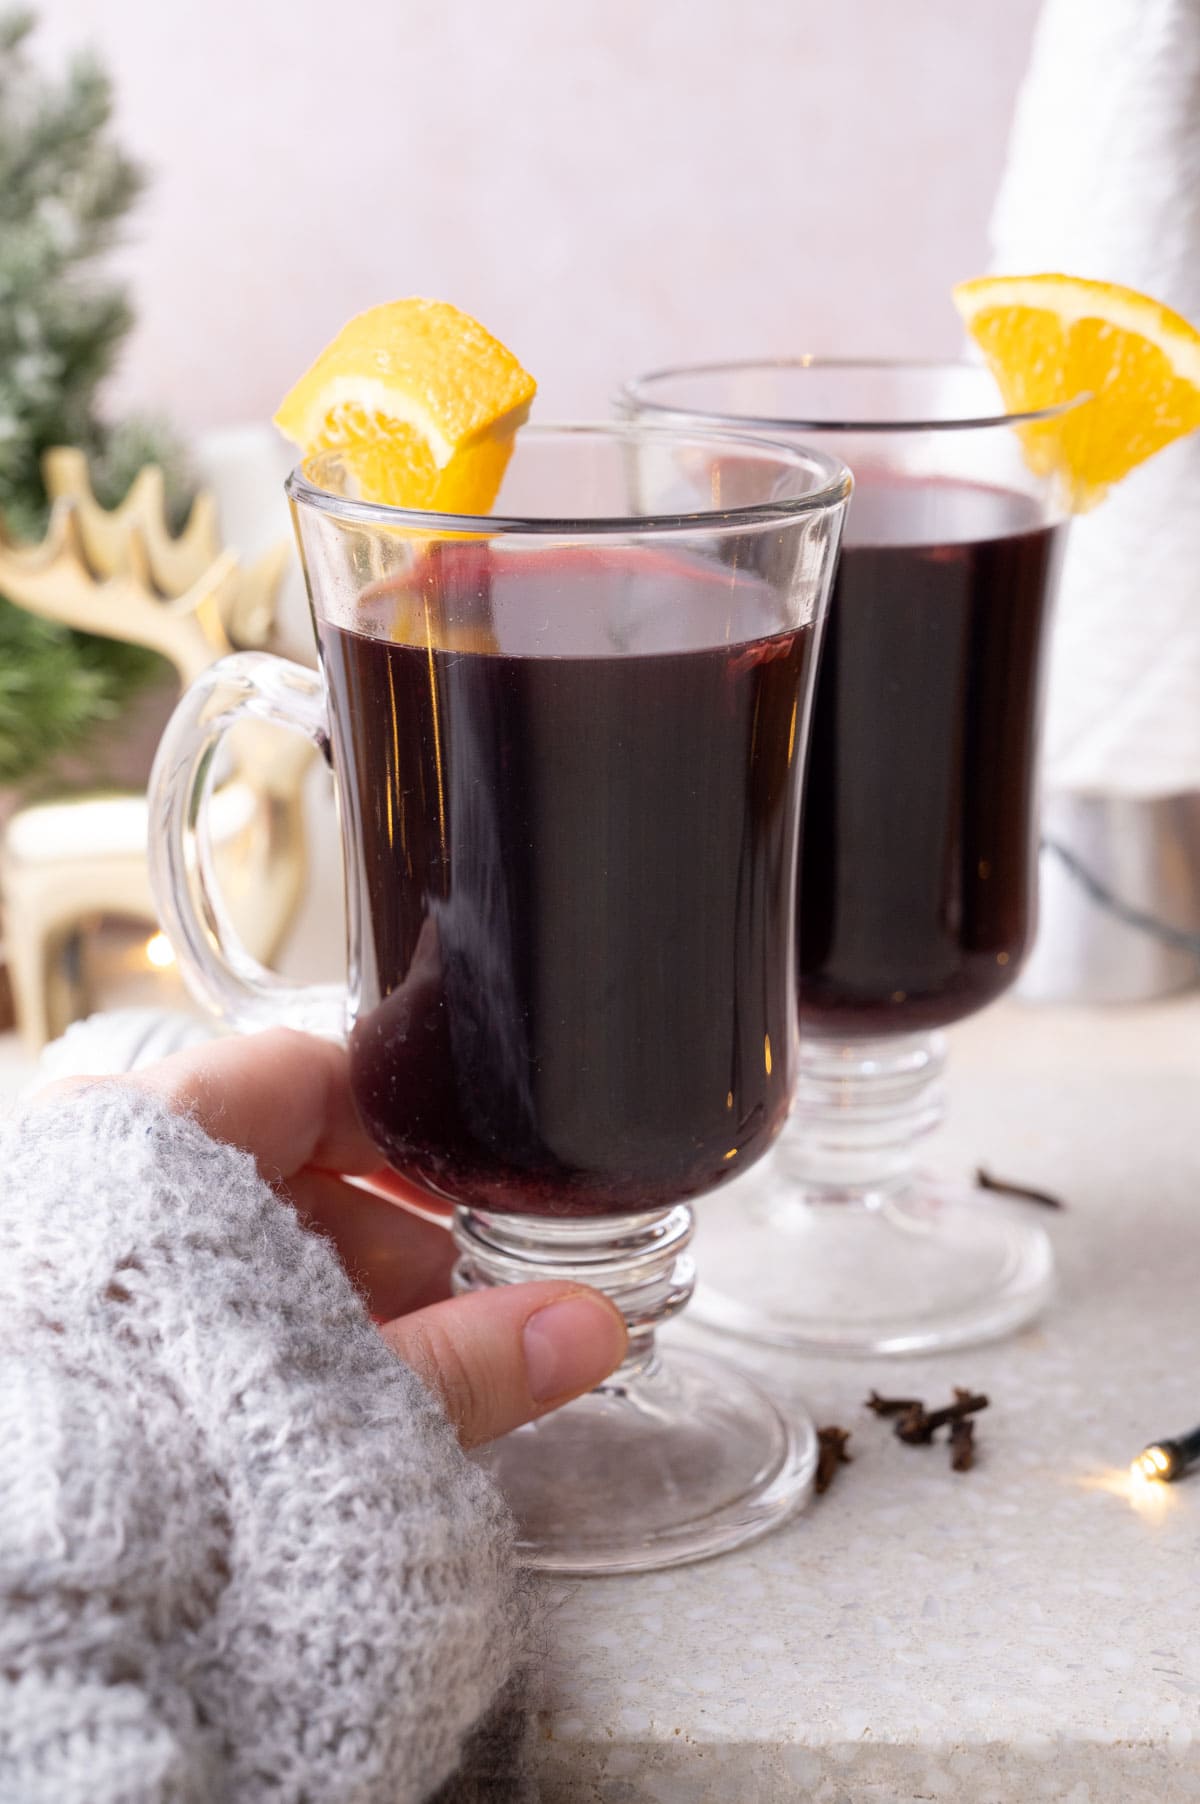 Two glasses with Glühwein on a grey stone board garnished with orange wedges. One glass is held in a hand.